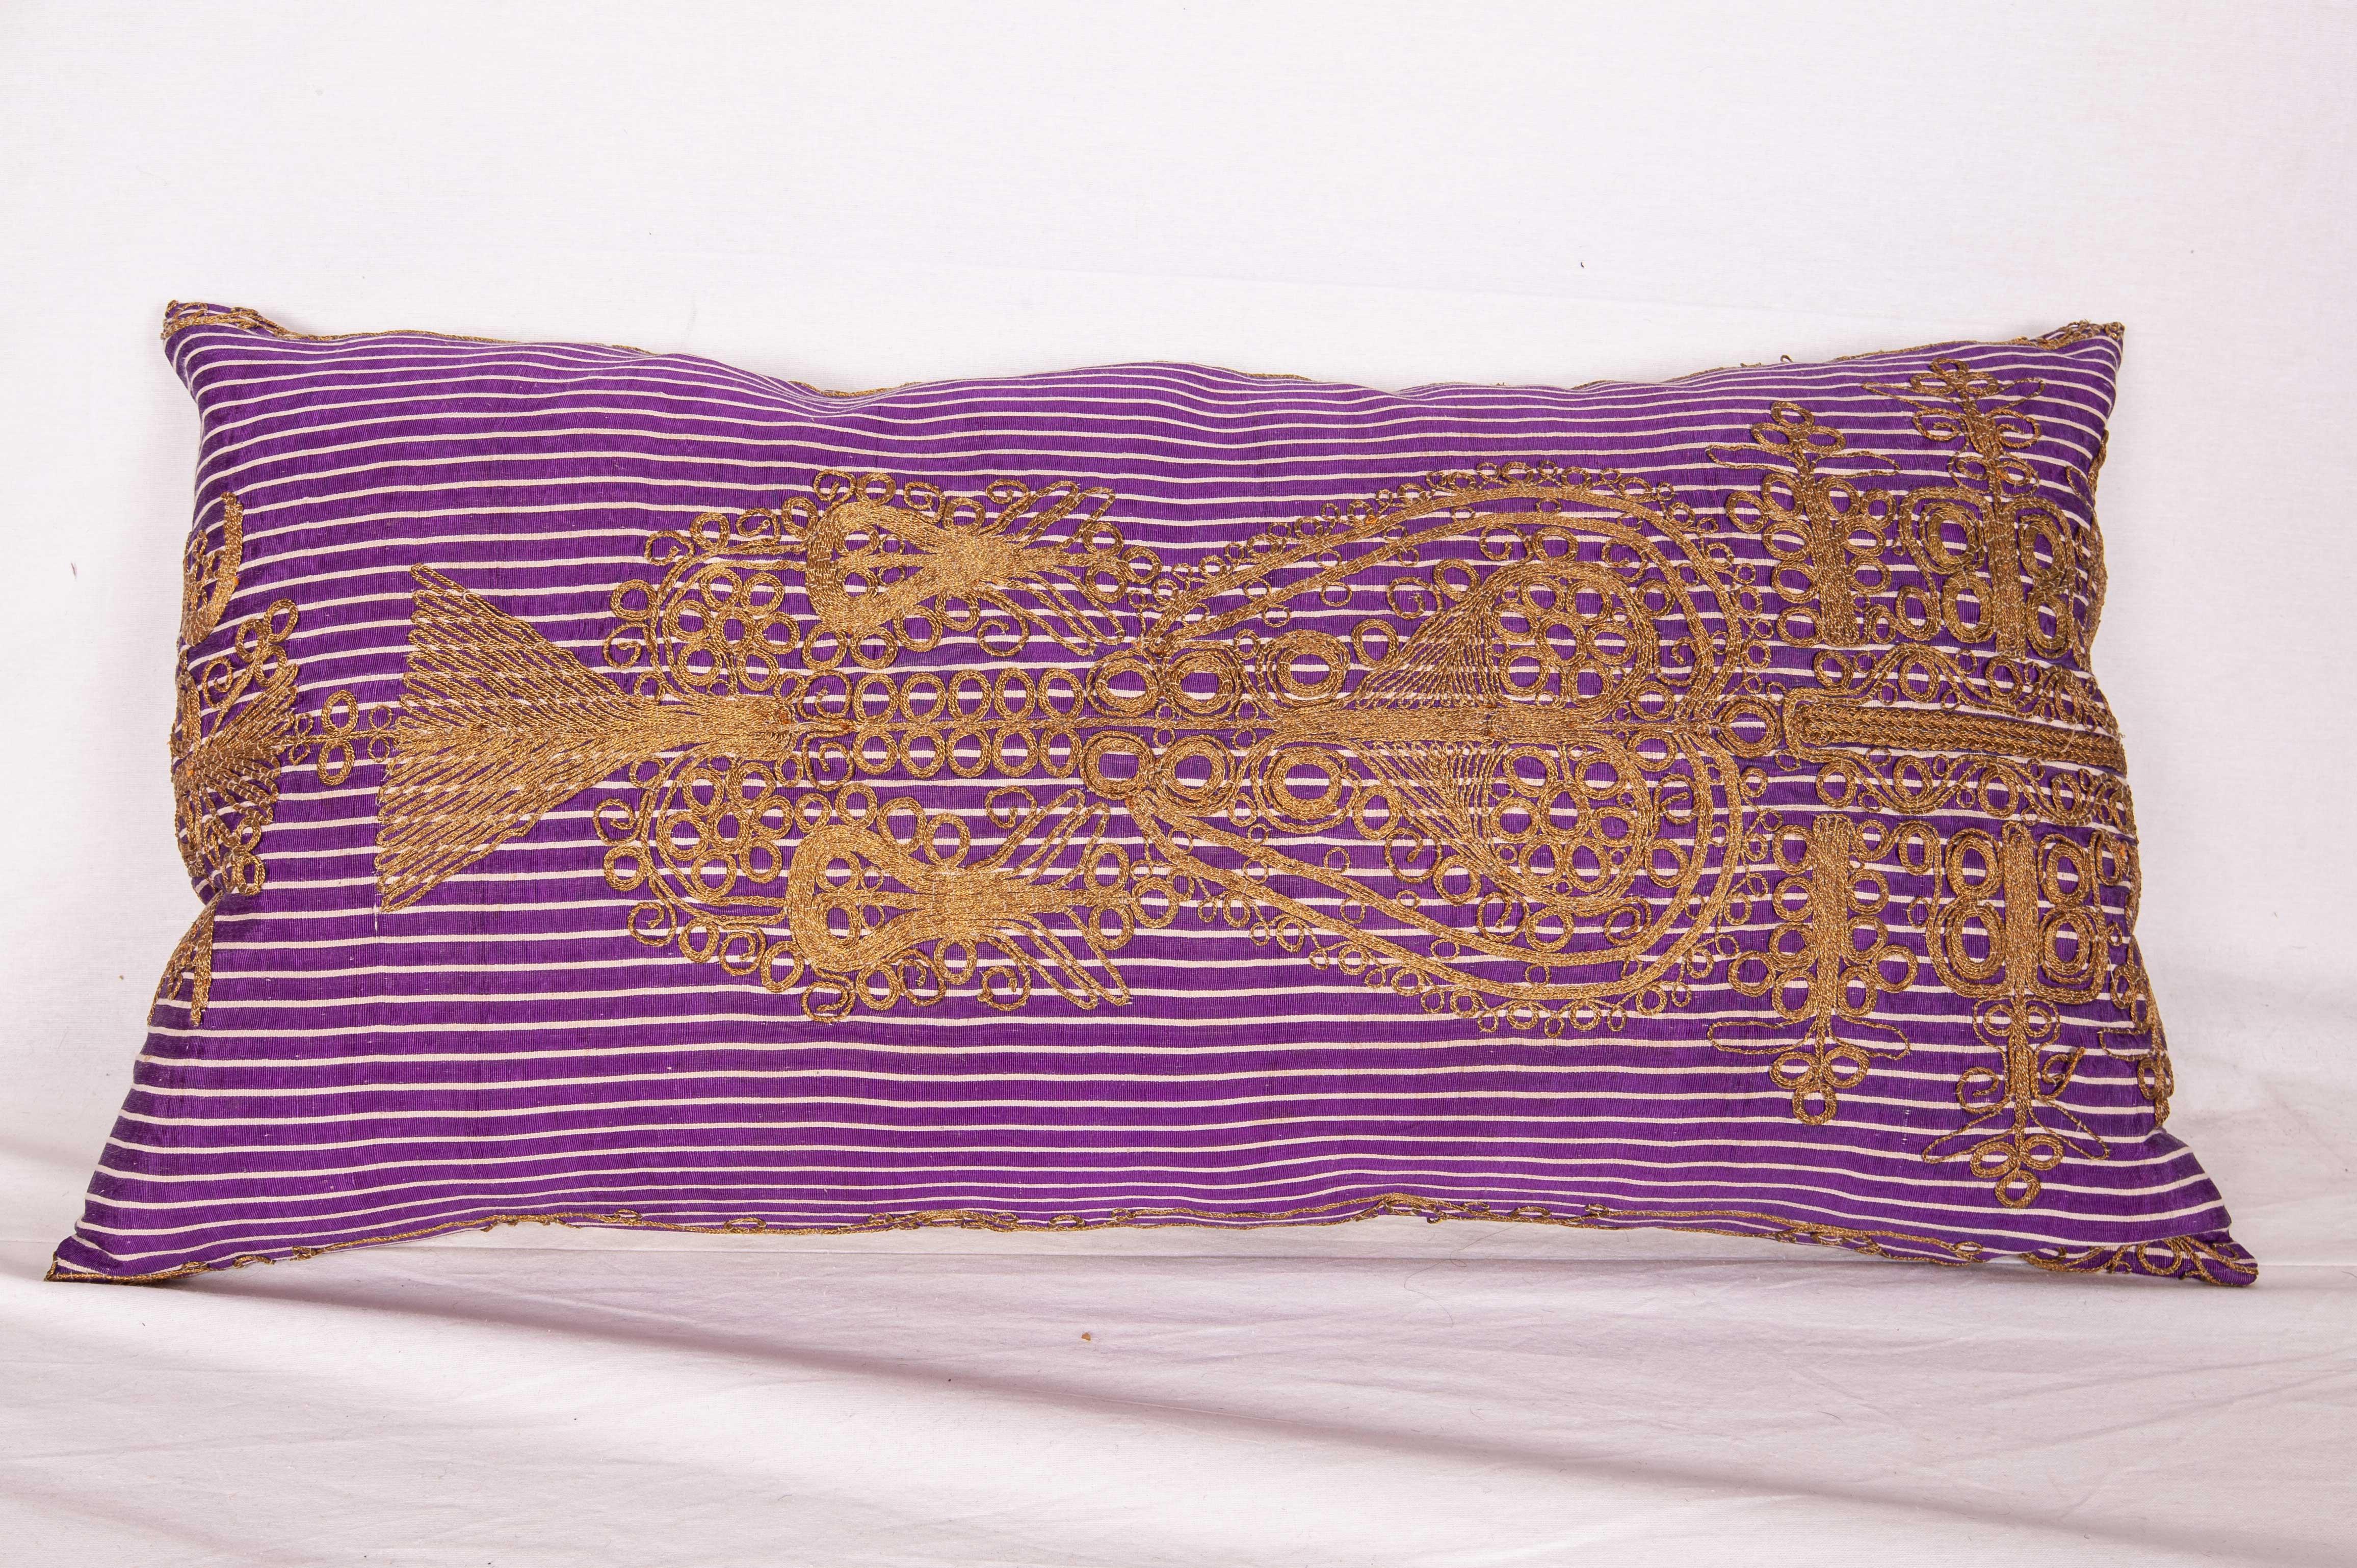 Hand-Woven Vintage Pillow Cases Fashioned from a Mid-20th Century Anatolian Shalvars